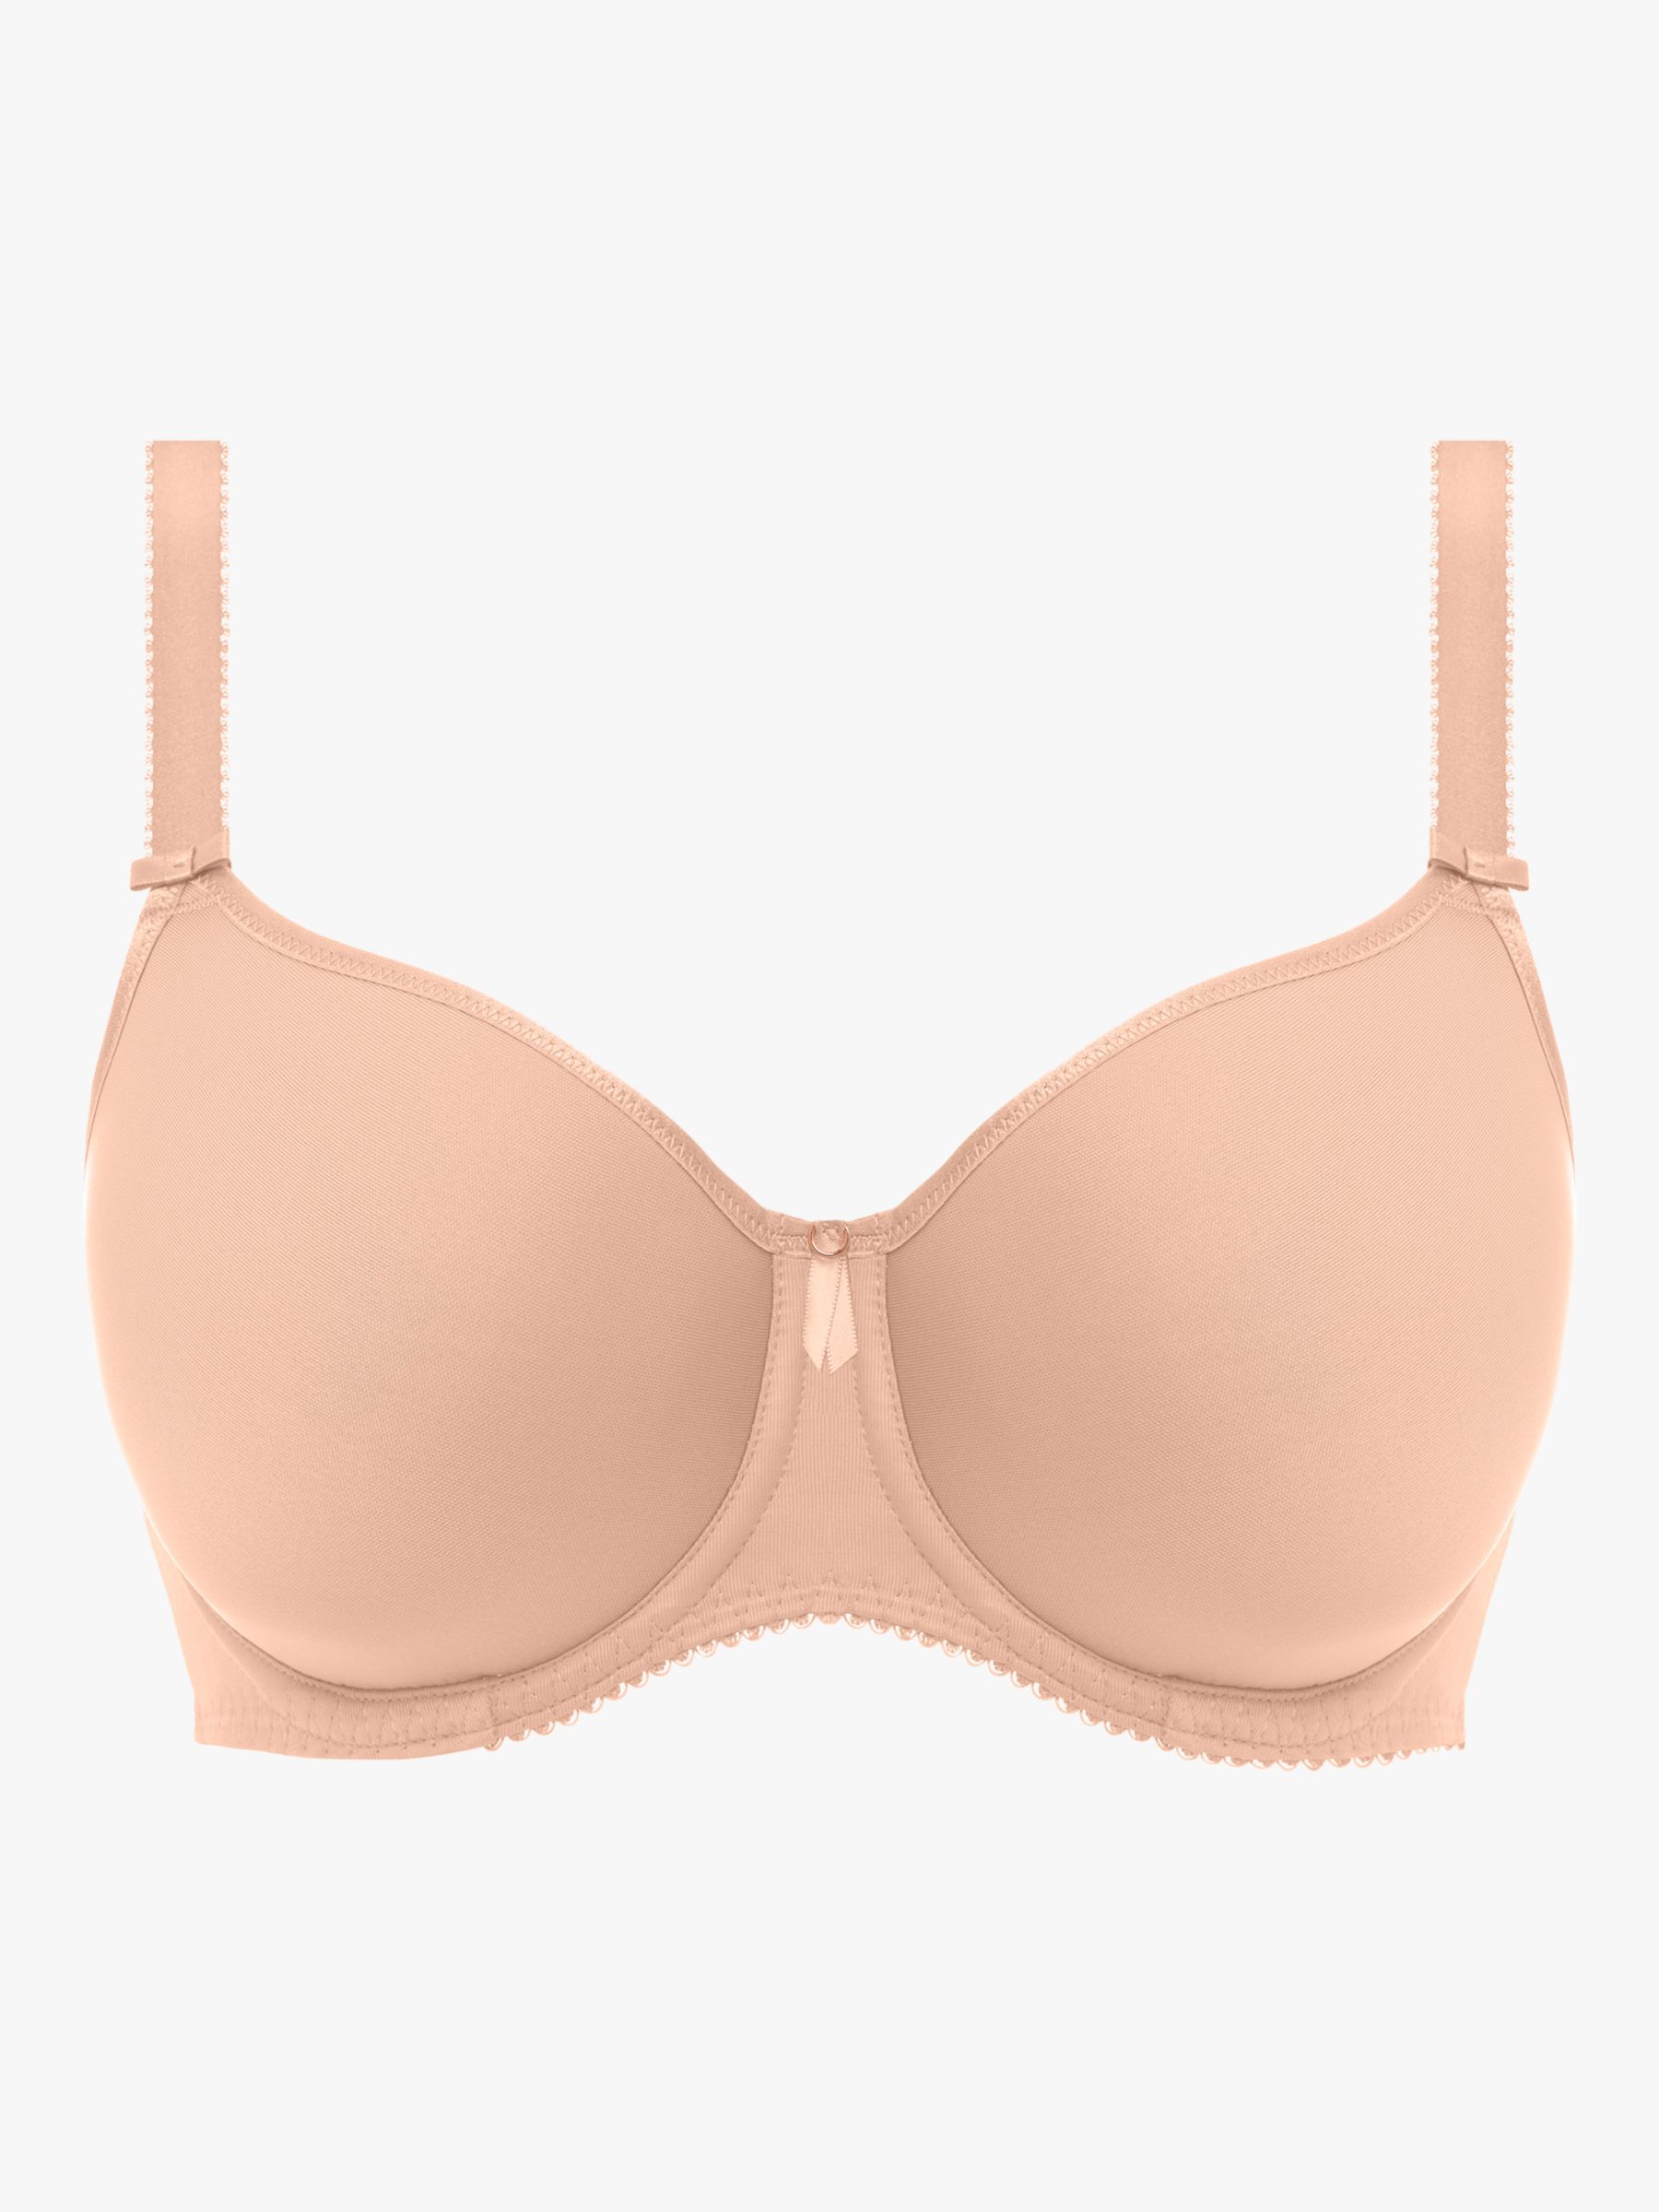 PrimaDonna Every Woman Spacer T-Shirt Bra